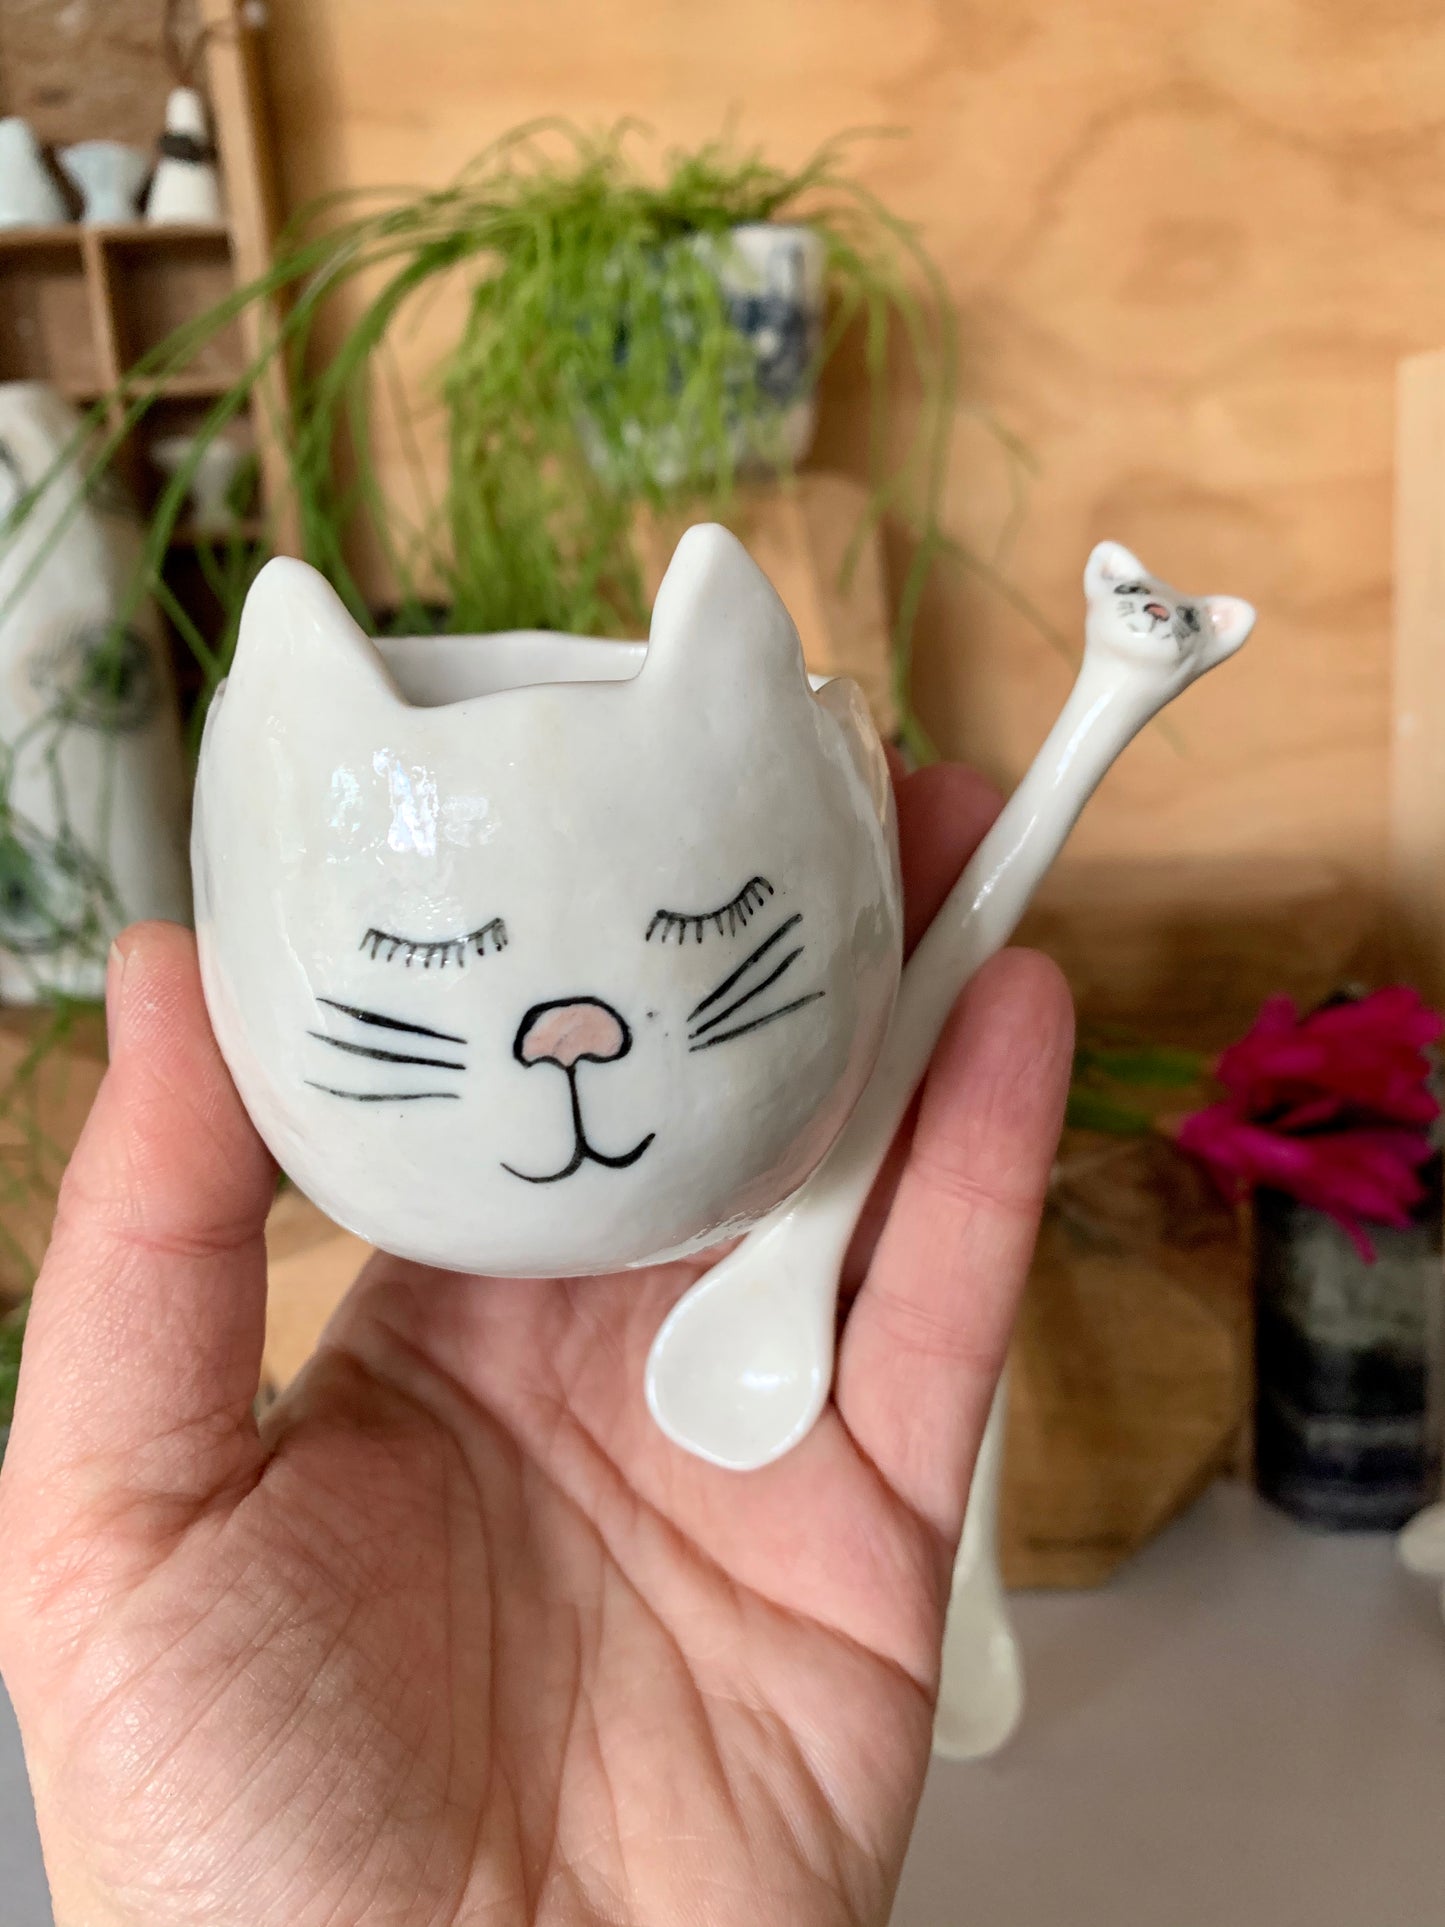 One set - Painted ‘Cat’ small Salt/ sugar/ spice bowl and spoon